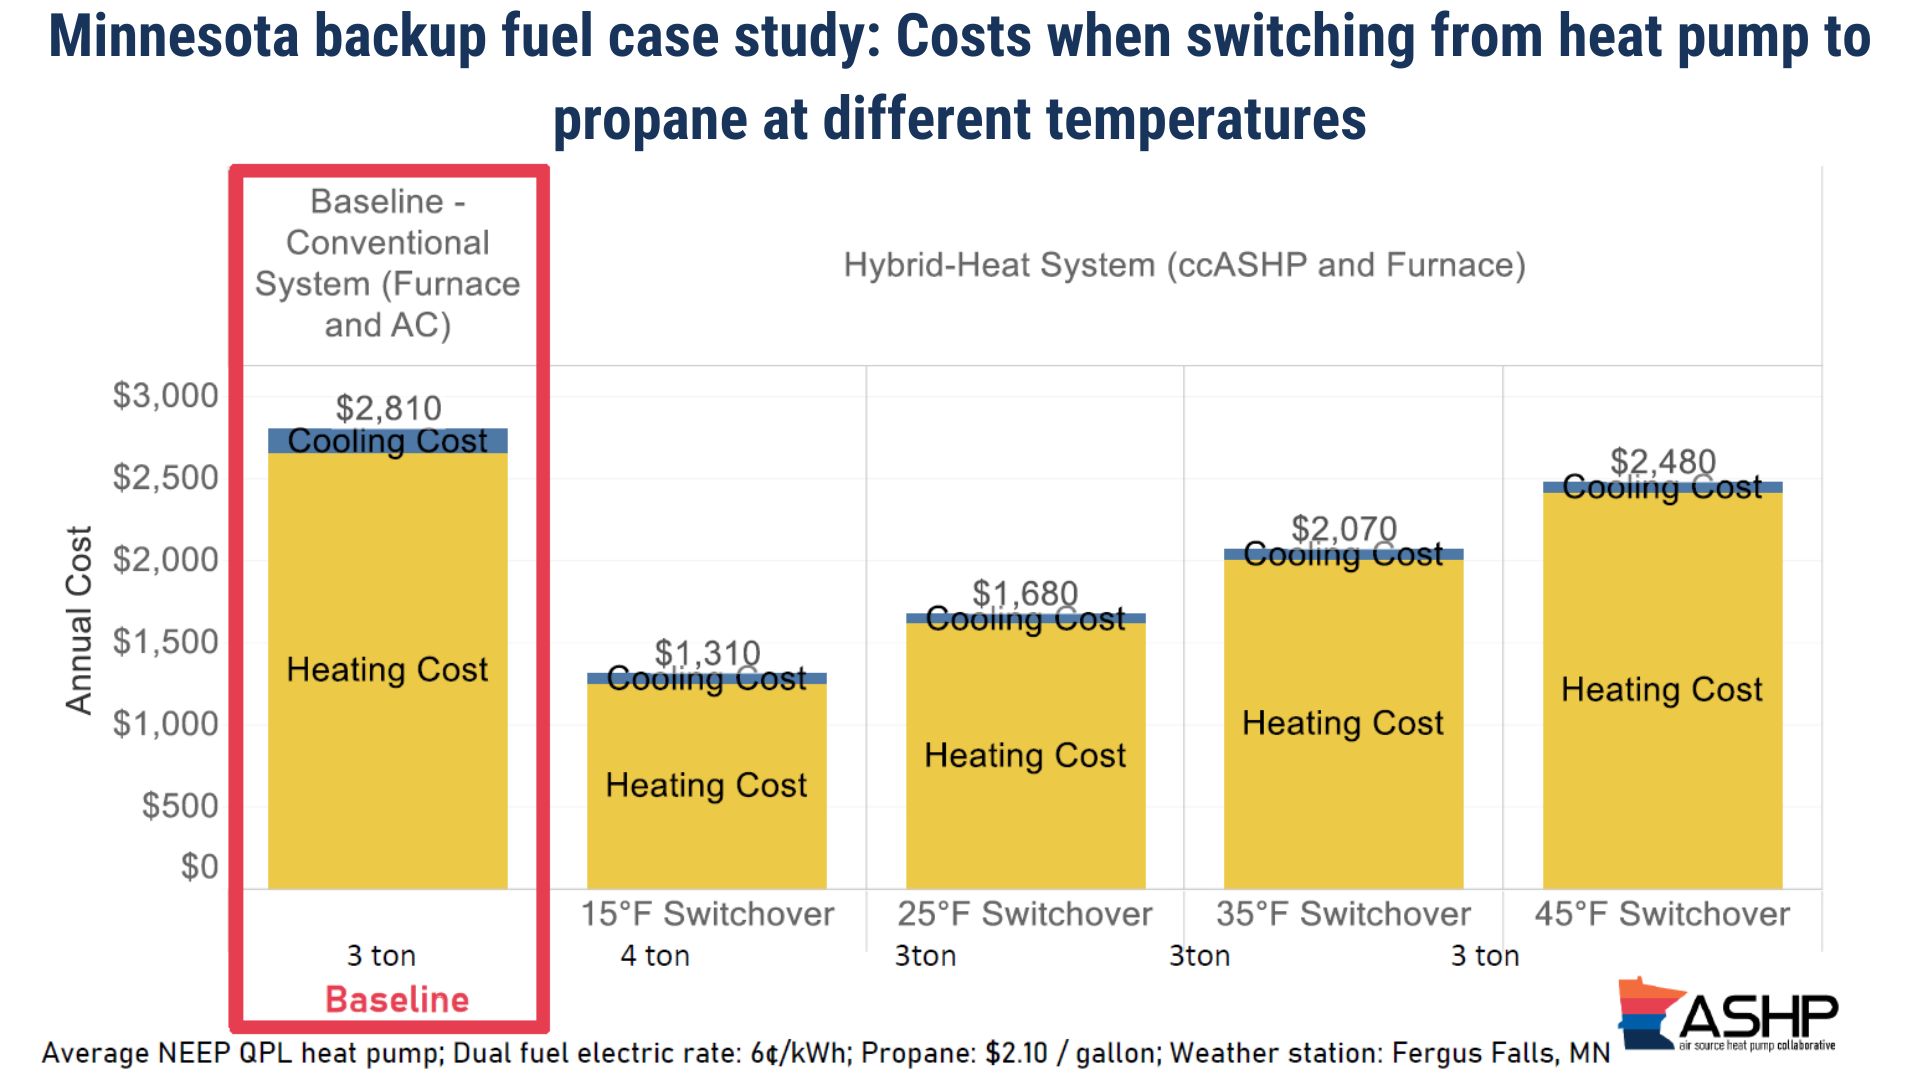 The title of this chart is "Minnesota backup fuel case study: Costs when switching from heat pump to propane at different temperatures."